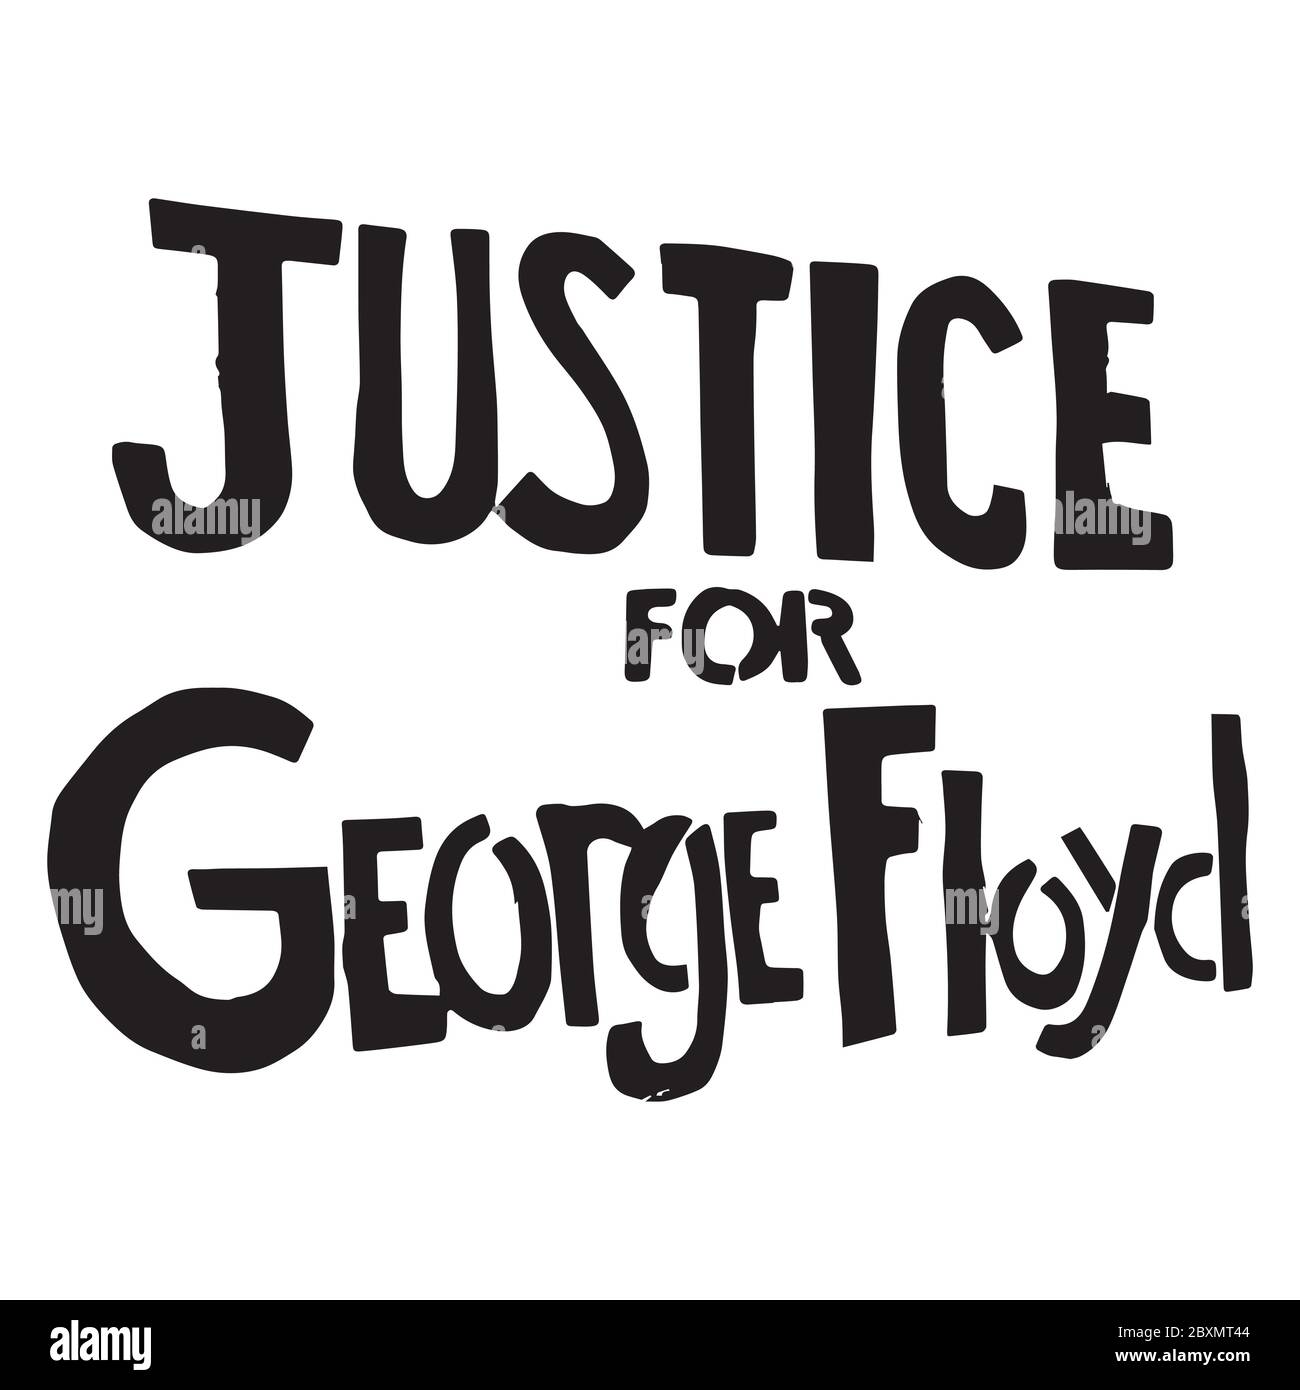 Justice for George Floyd Text. Illustration Sign Depicting Justice for Floyd. Black and white EPS Vector File. Stock Vector